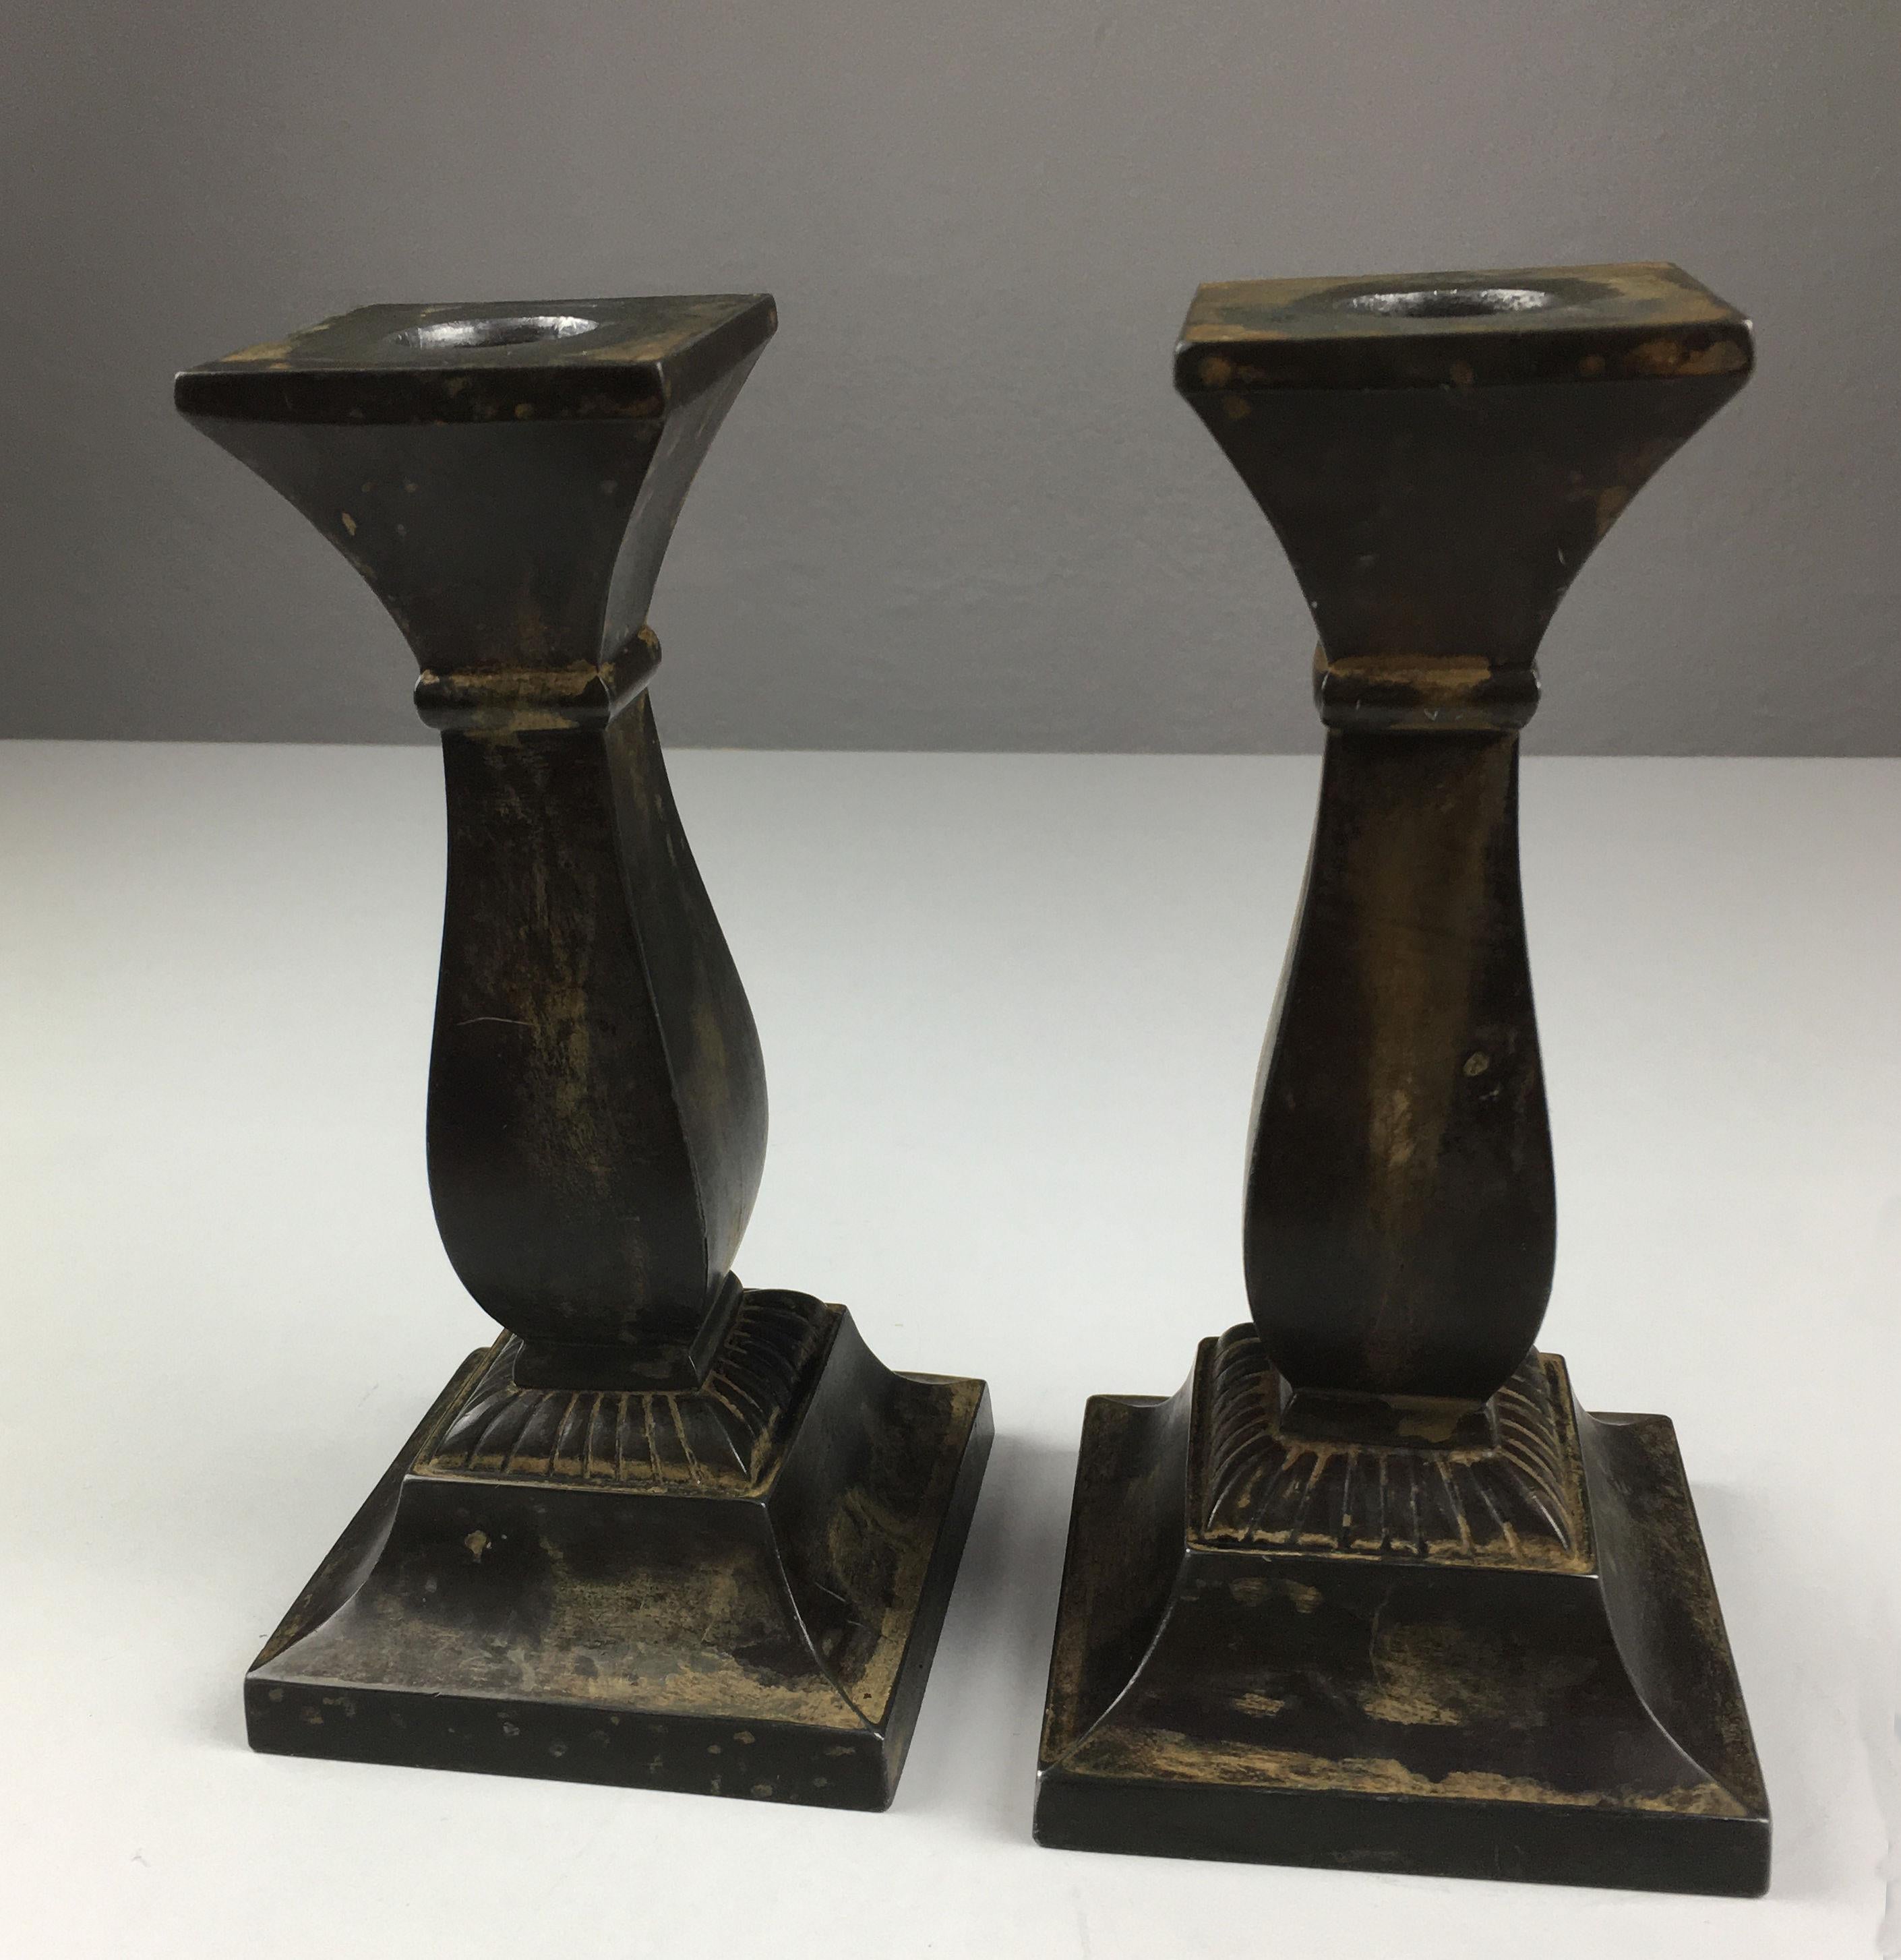 Set of two Danish Just Andersen disco metal candle holders produced by Just Andersen A/S in the 1940 - 50's.

The candle holders are in good vintage condition and marked with Just. Andersens triangle mark. 

Just Andersen 1884-1943 was born in